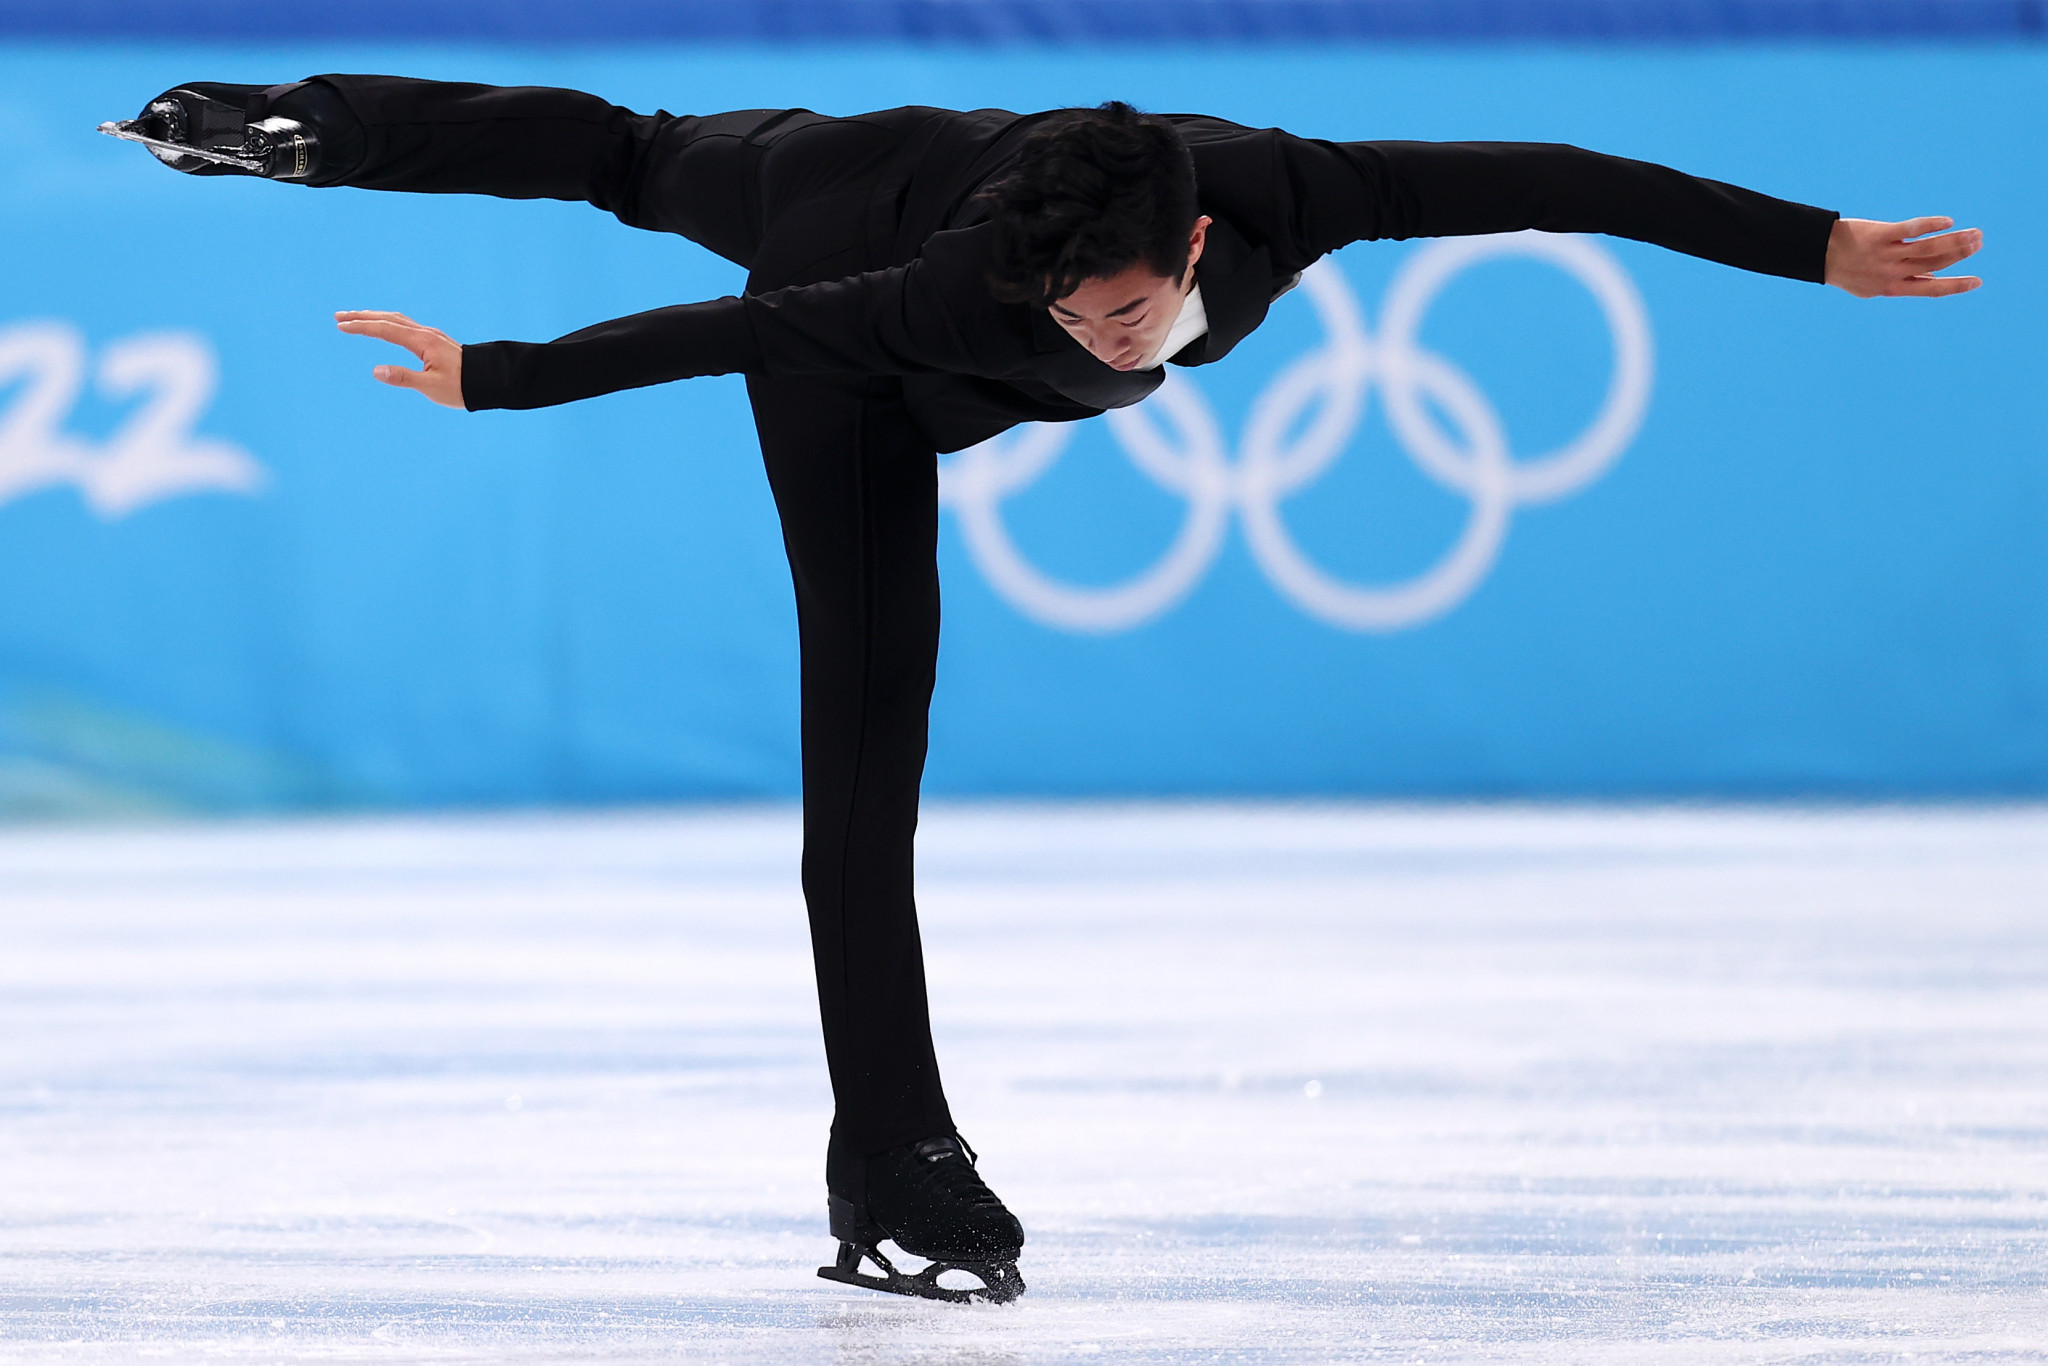 American Nathan Chen does not have a gold medal yet, but did dazzle in setting a short programme world record ©Getty Images